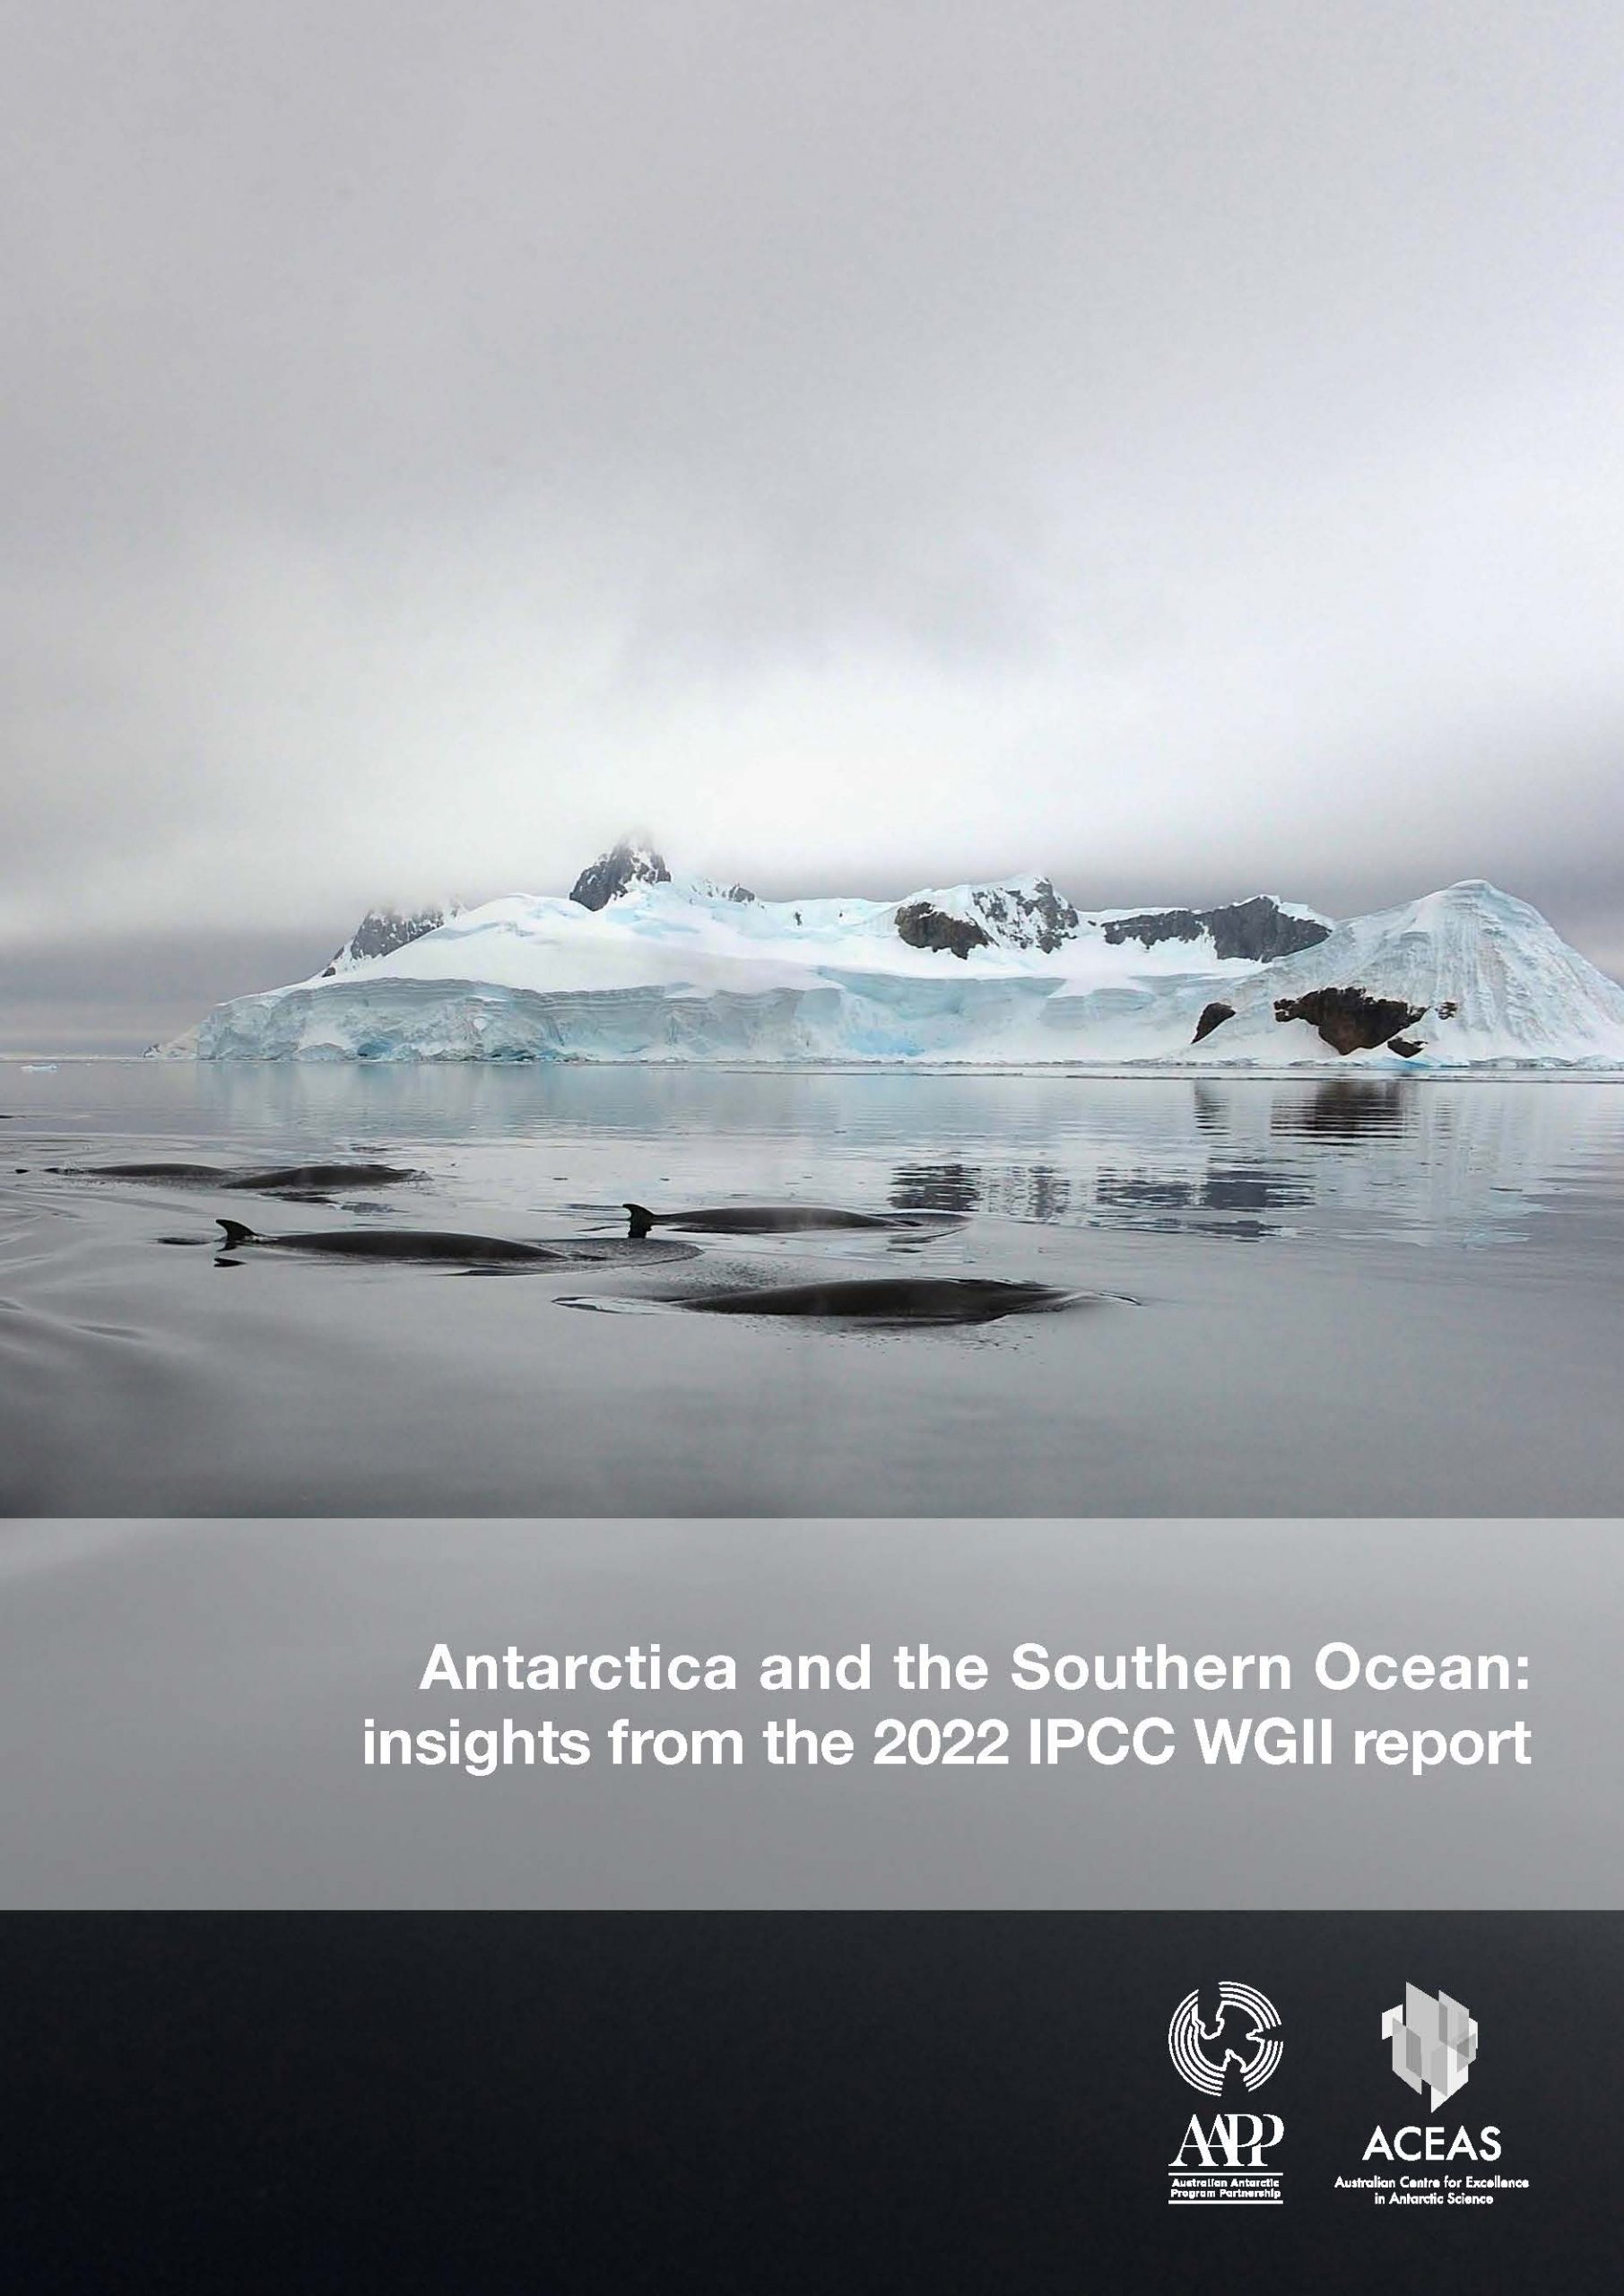 Antarctica-and-the-Southern-Ocean-insights-from-the-2022-IPCC-WGII-report_Page_1